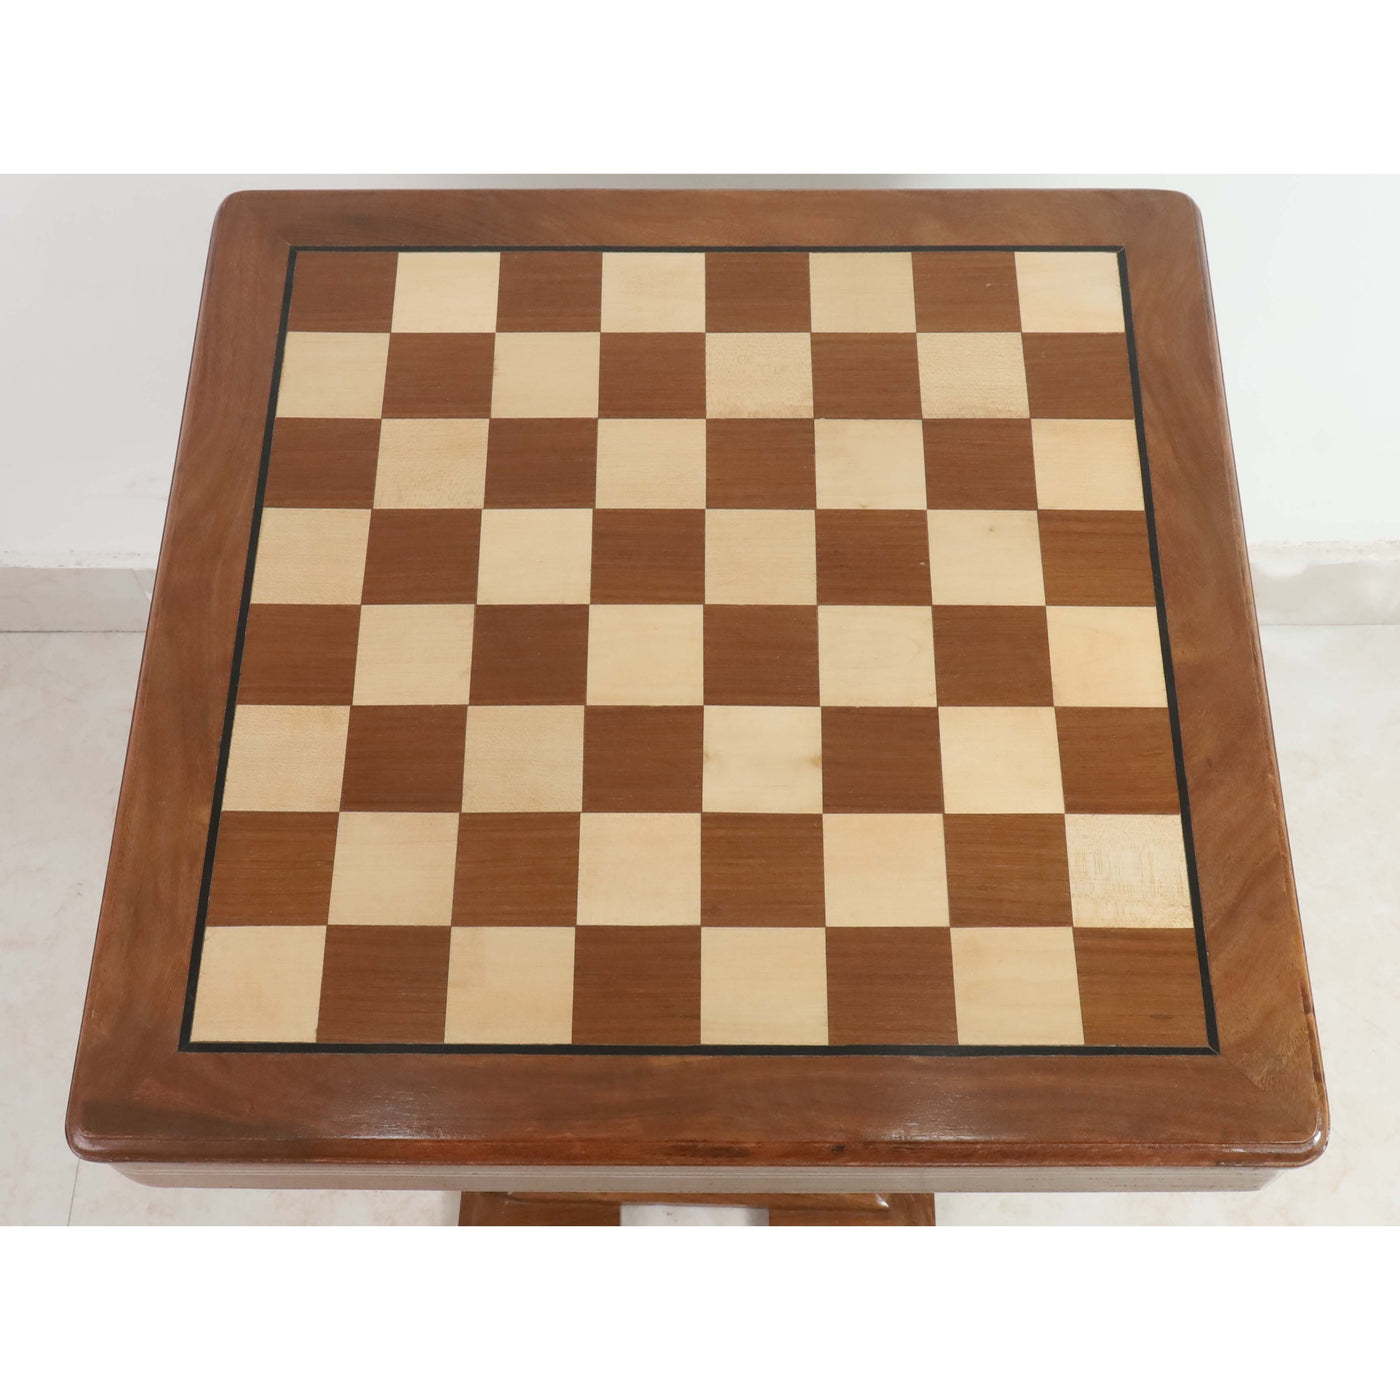 20" Wooden Chess Board Table with Staunton Chess Pieces -Golden Rosewood & Maple